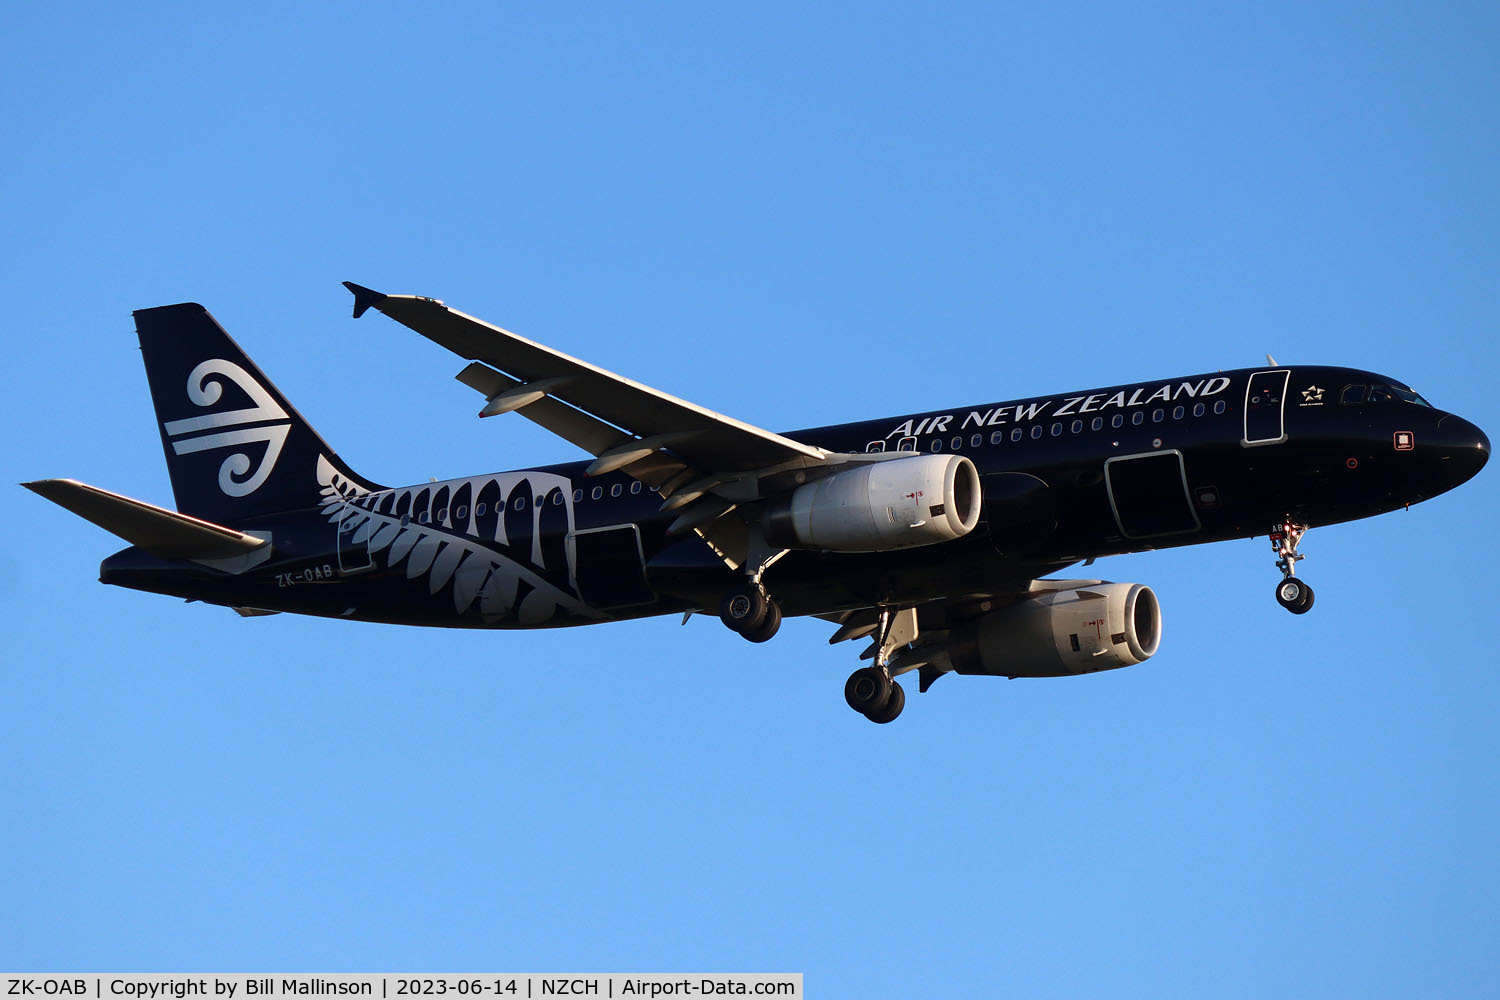 ZK-OAB, 2010 Airbus A320-232 C/N 4553, NZ523 from AKL